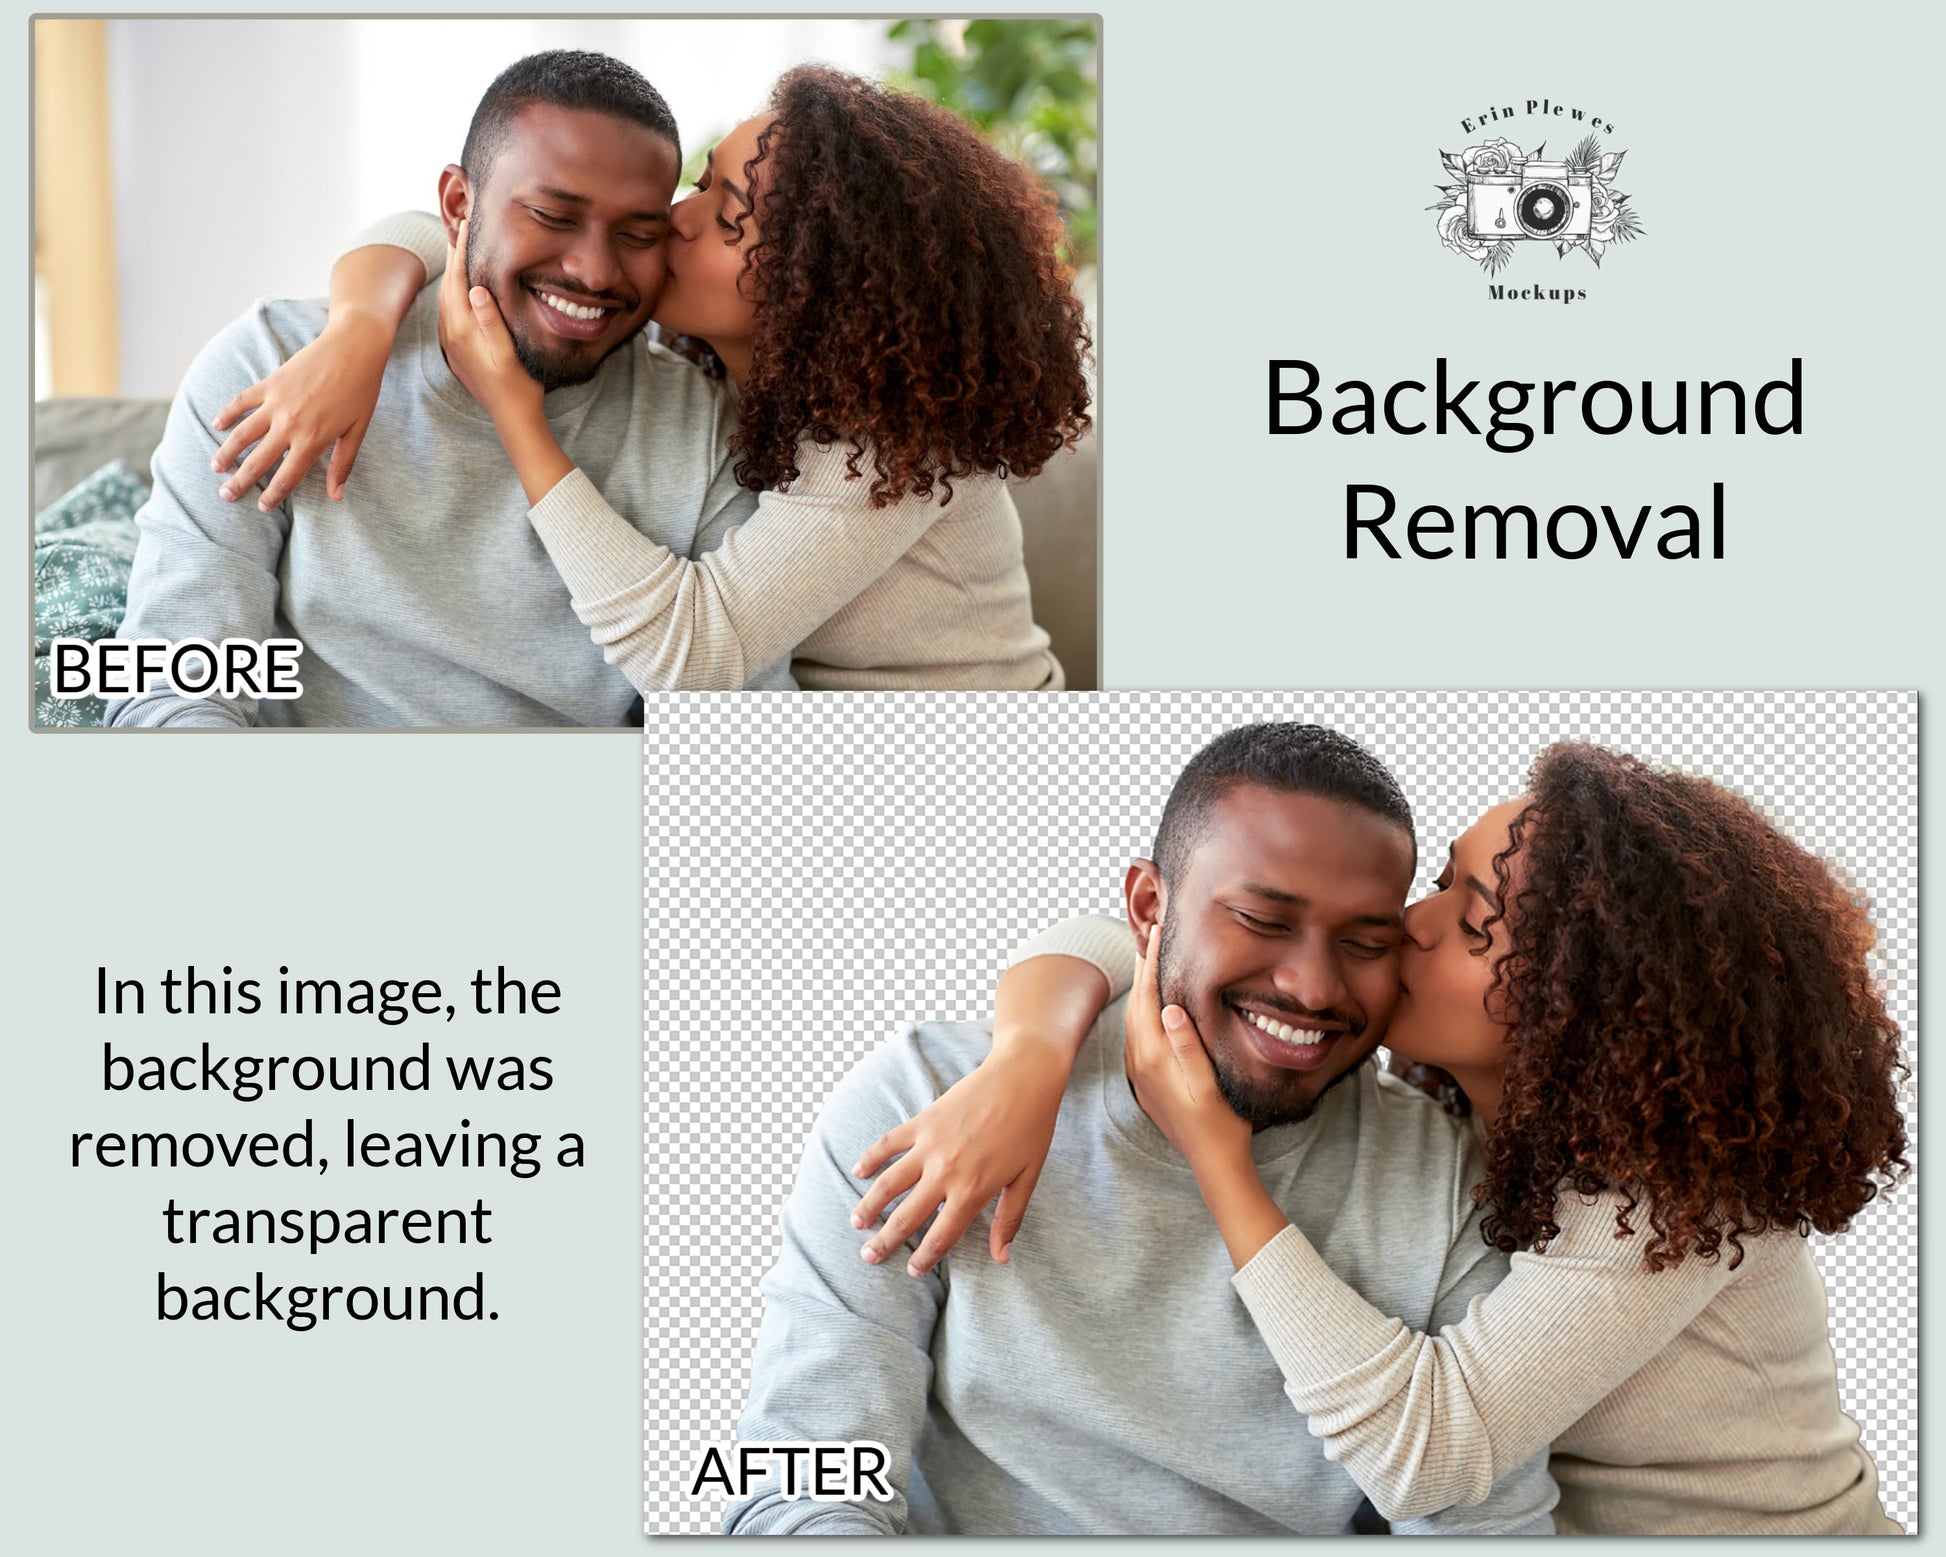 Photoshop Services, Add loved one to your photo, Object Removal, Person Removal, Photo Merge, Photoshop Deceased, Level 9